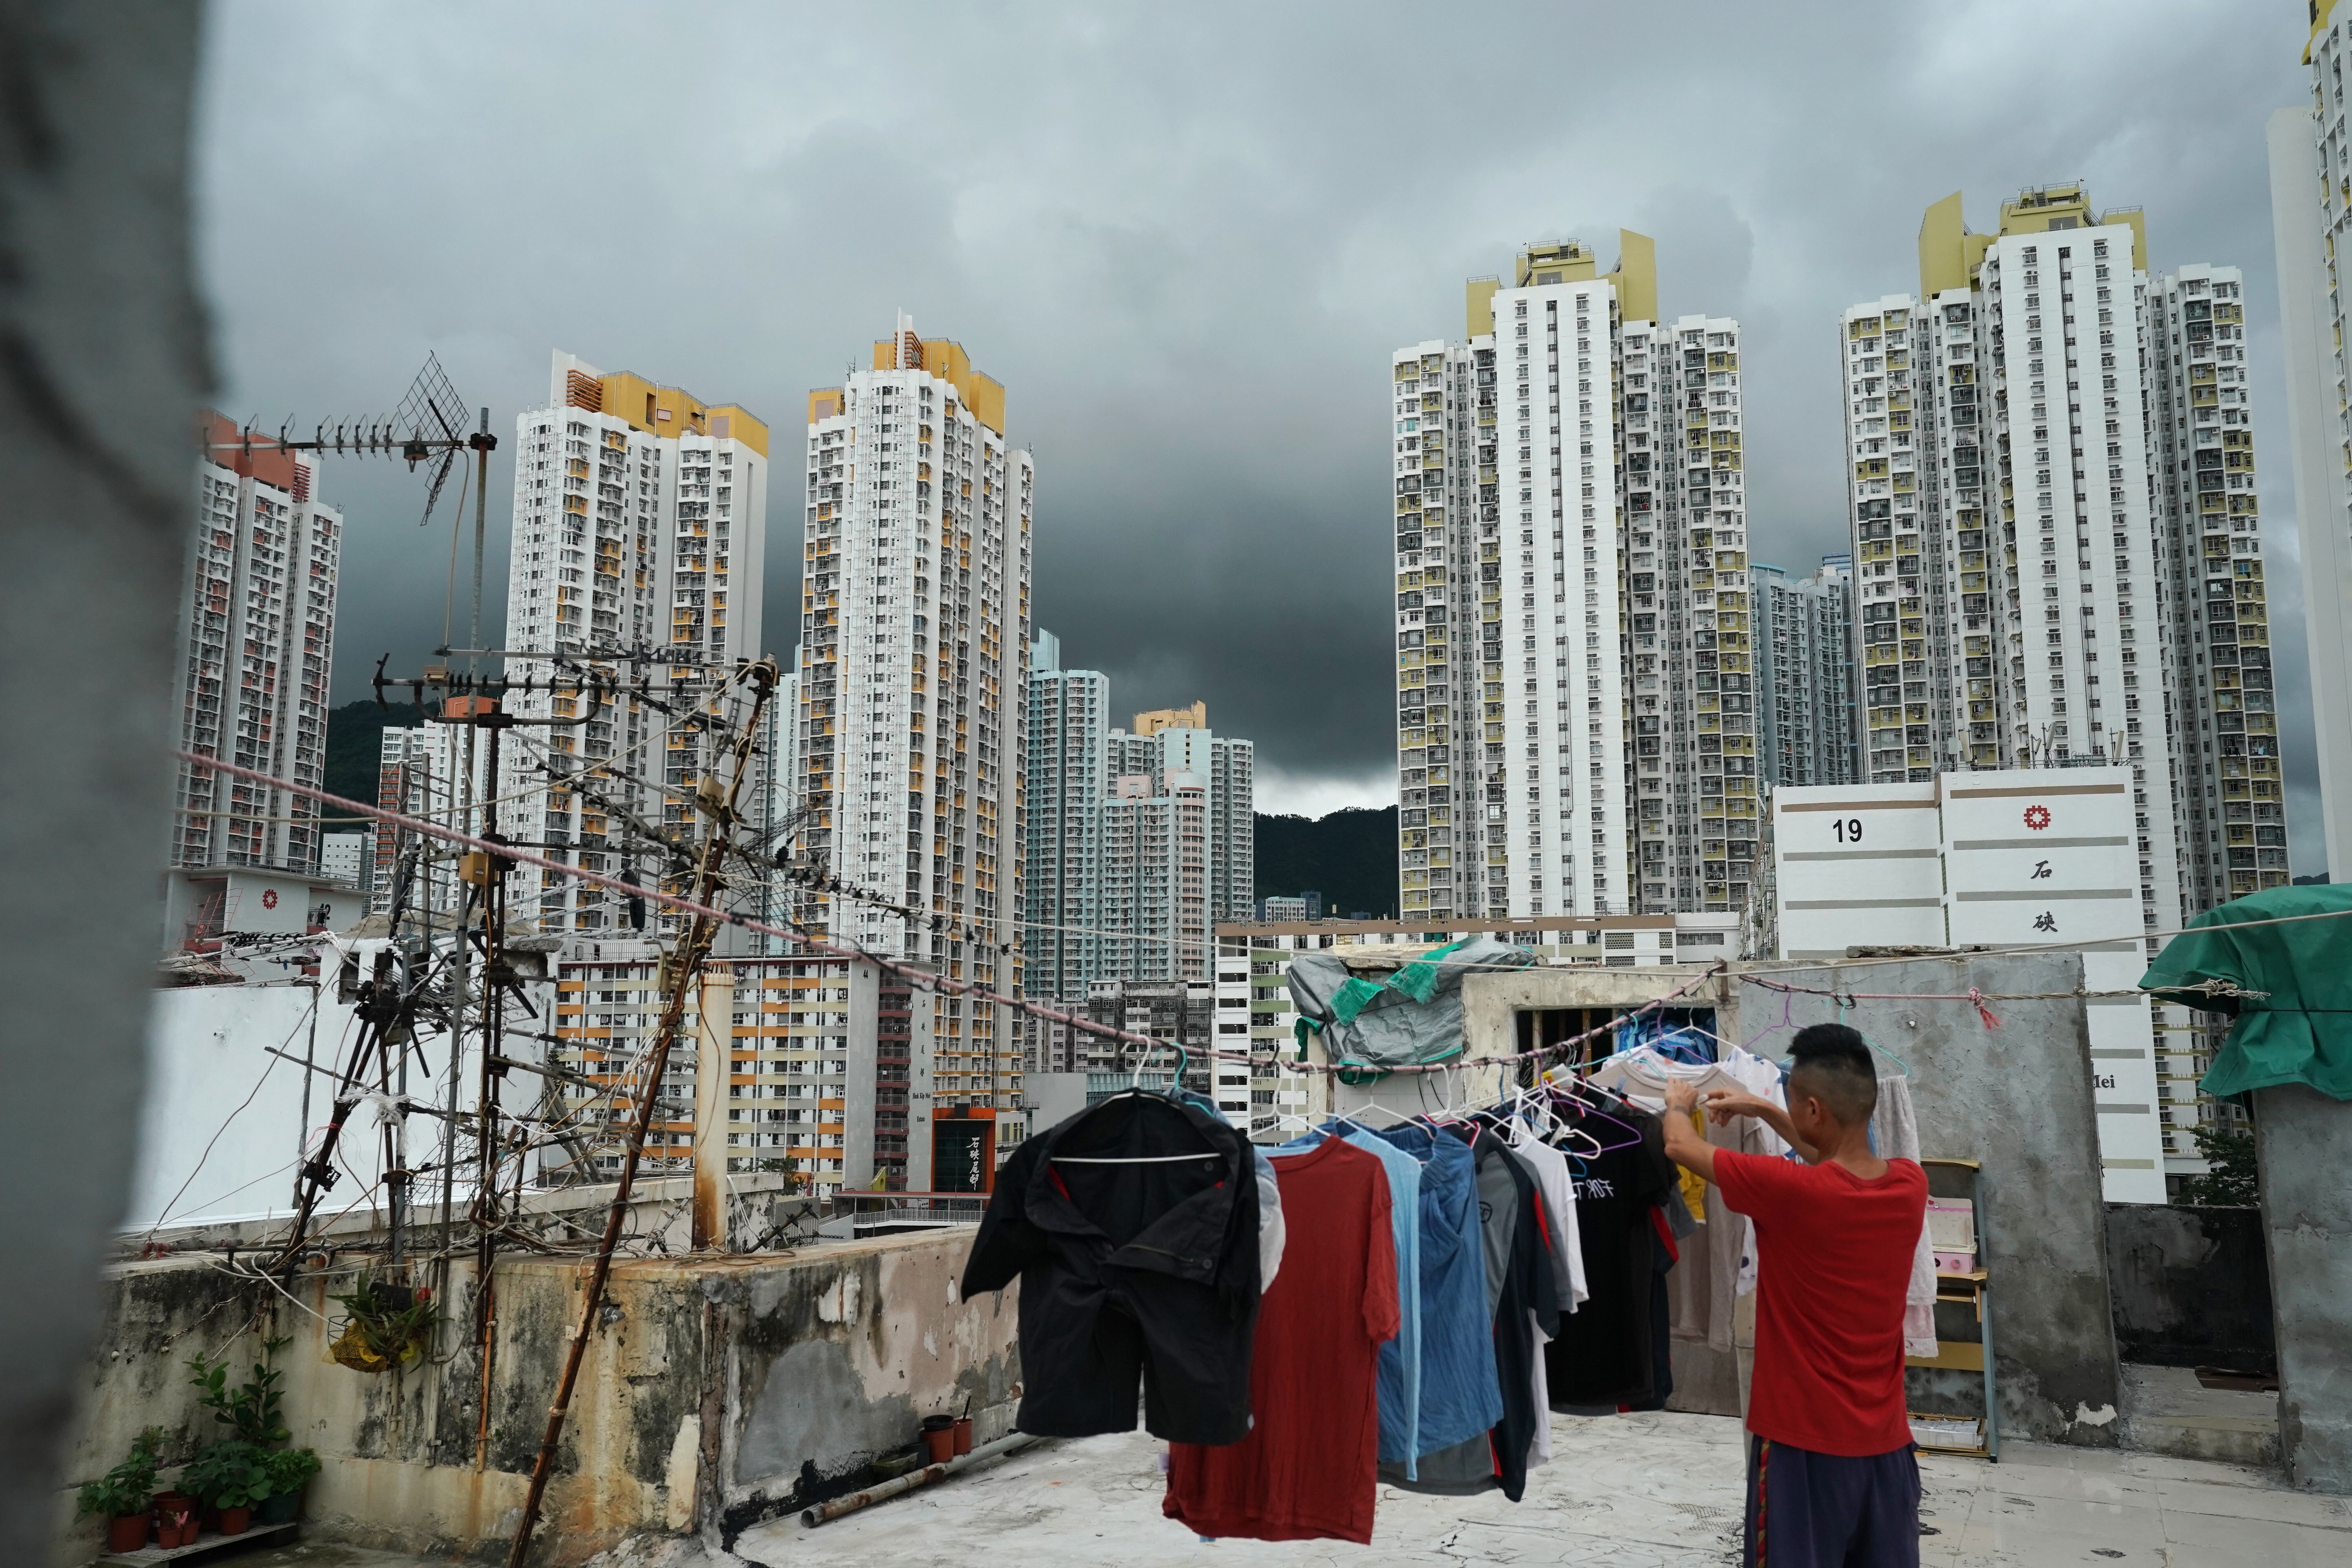 A man hangs his clothes to dry on the rooftop of a building in Sham Shui Po against the backdrop of public housing flats. Photo: Felix Wong